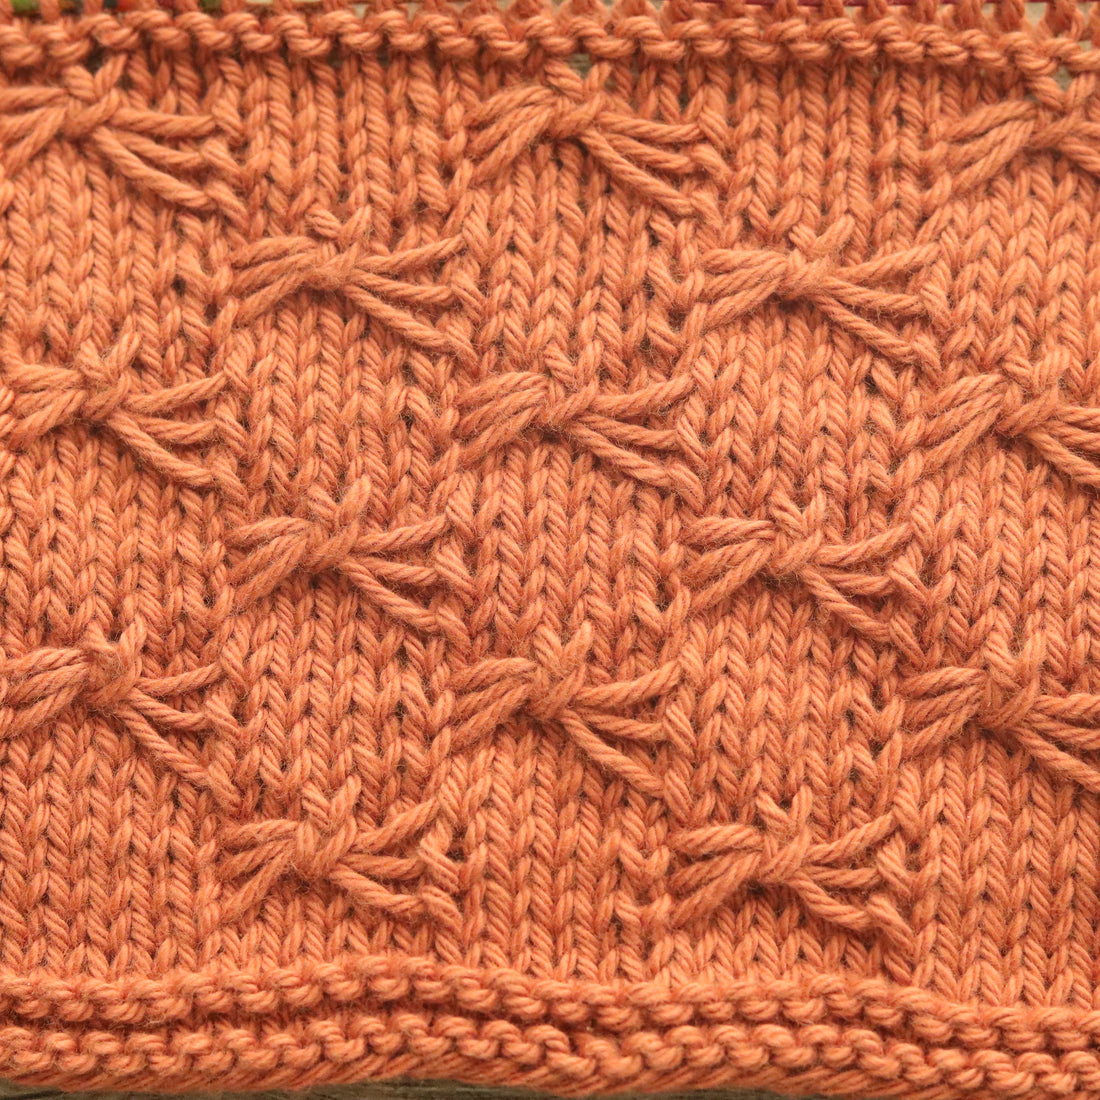 How To Knit: Butterfly Stitch Knitting Tutorial